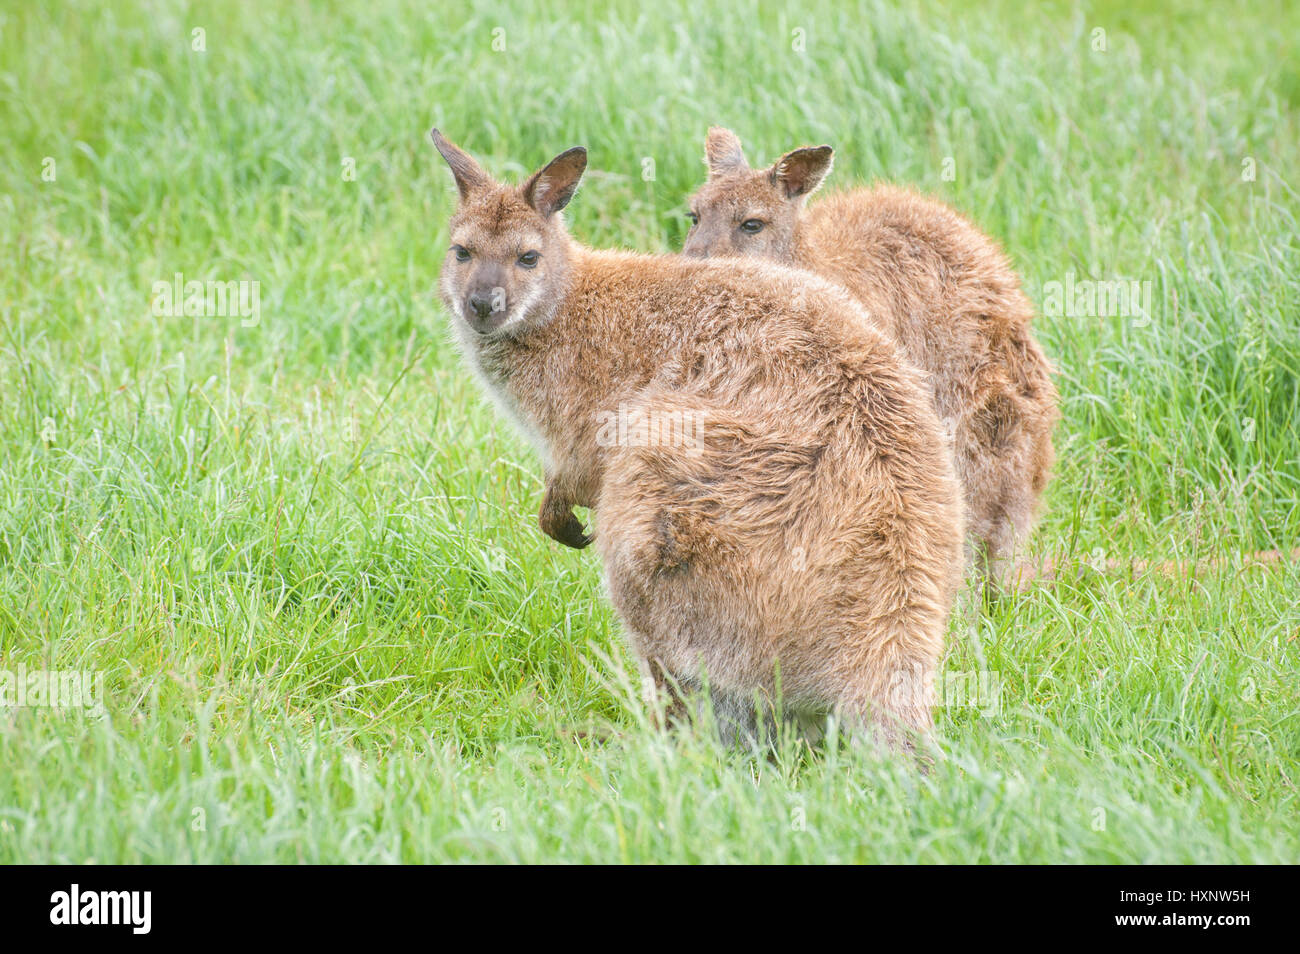 two young wallabies in a grassland environment Stock Photo